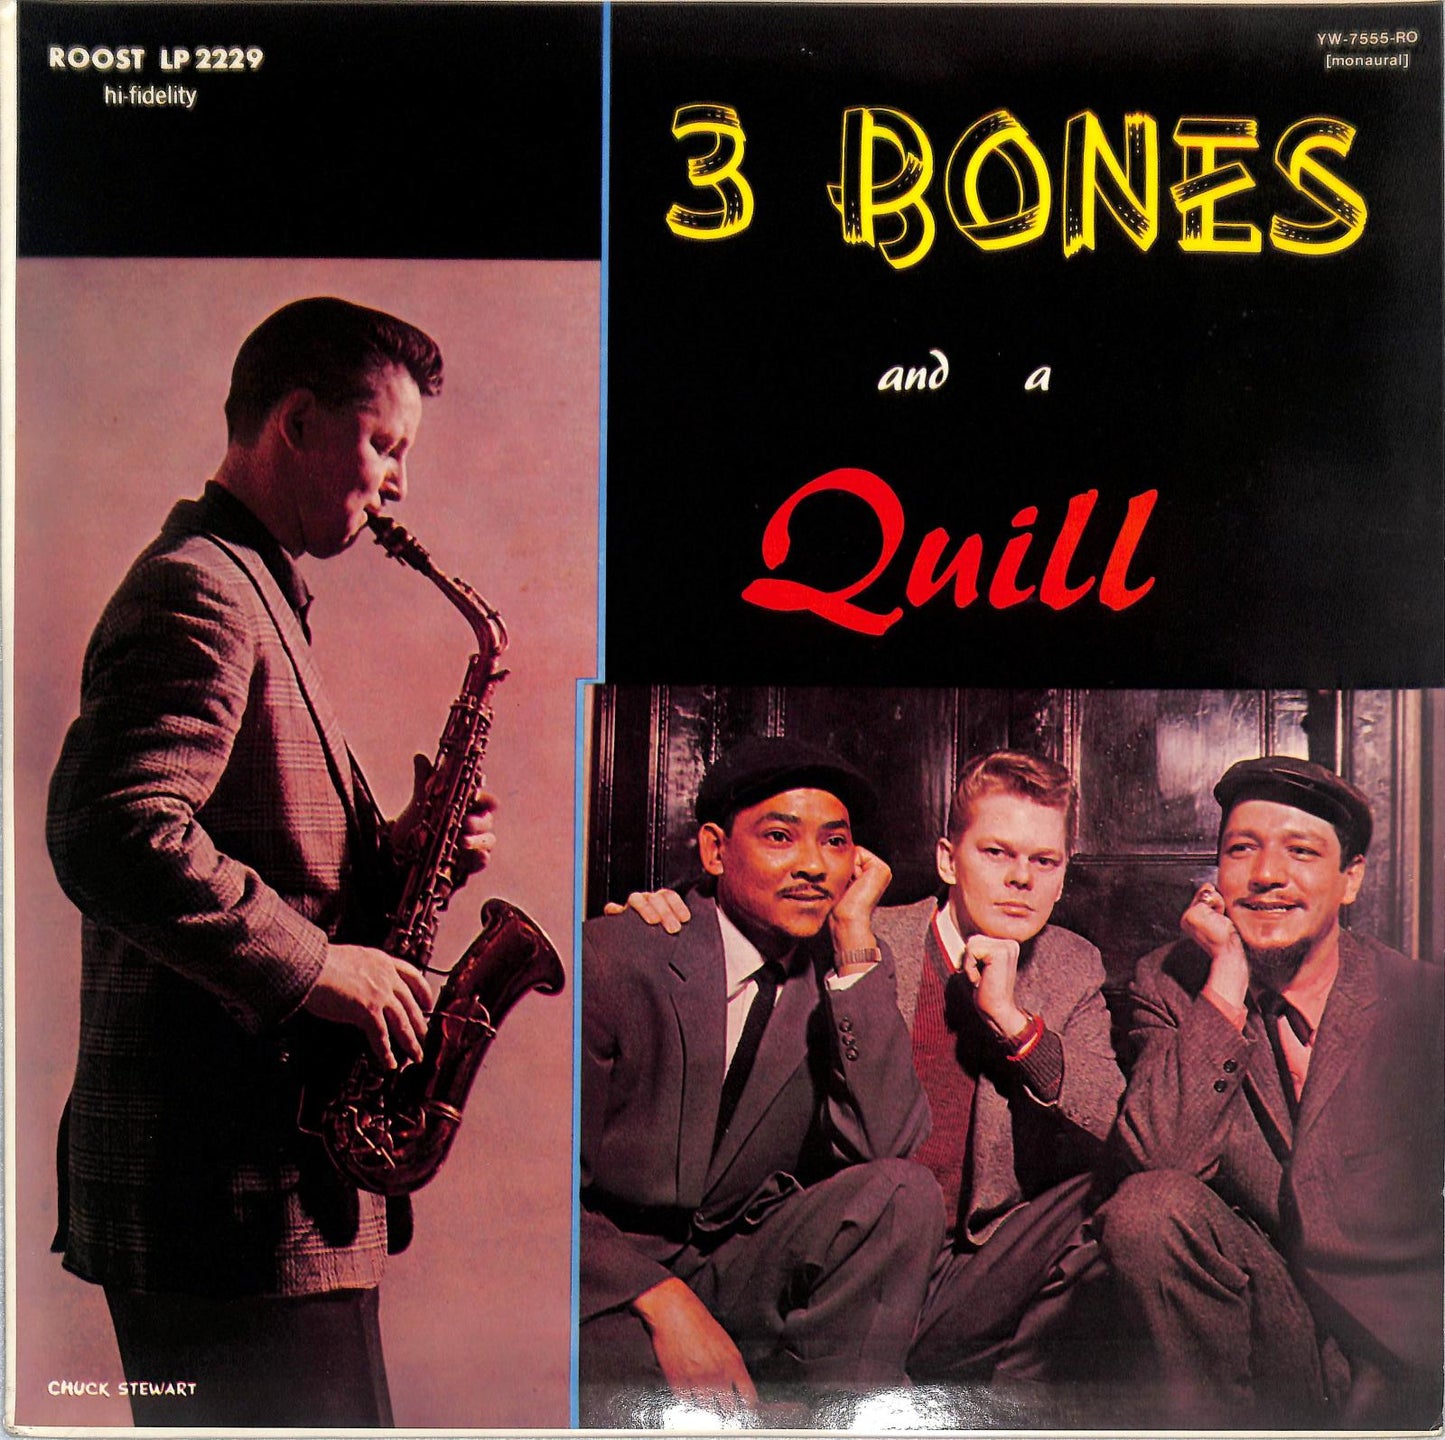 GENE QUILL - 3 Bones And A Quill